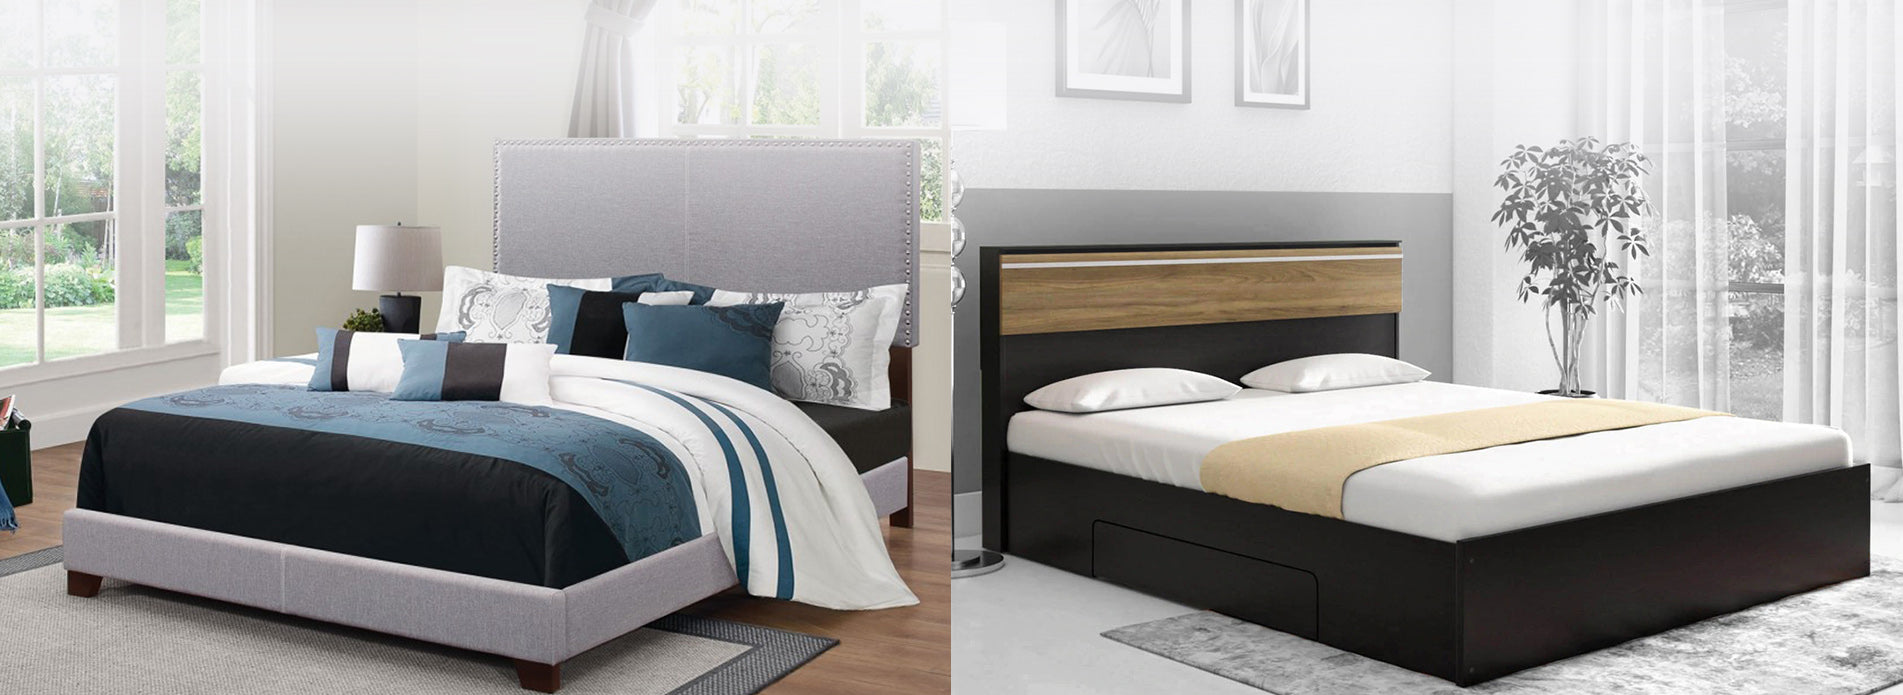 King vs Queen Bed Dimensions